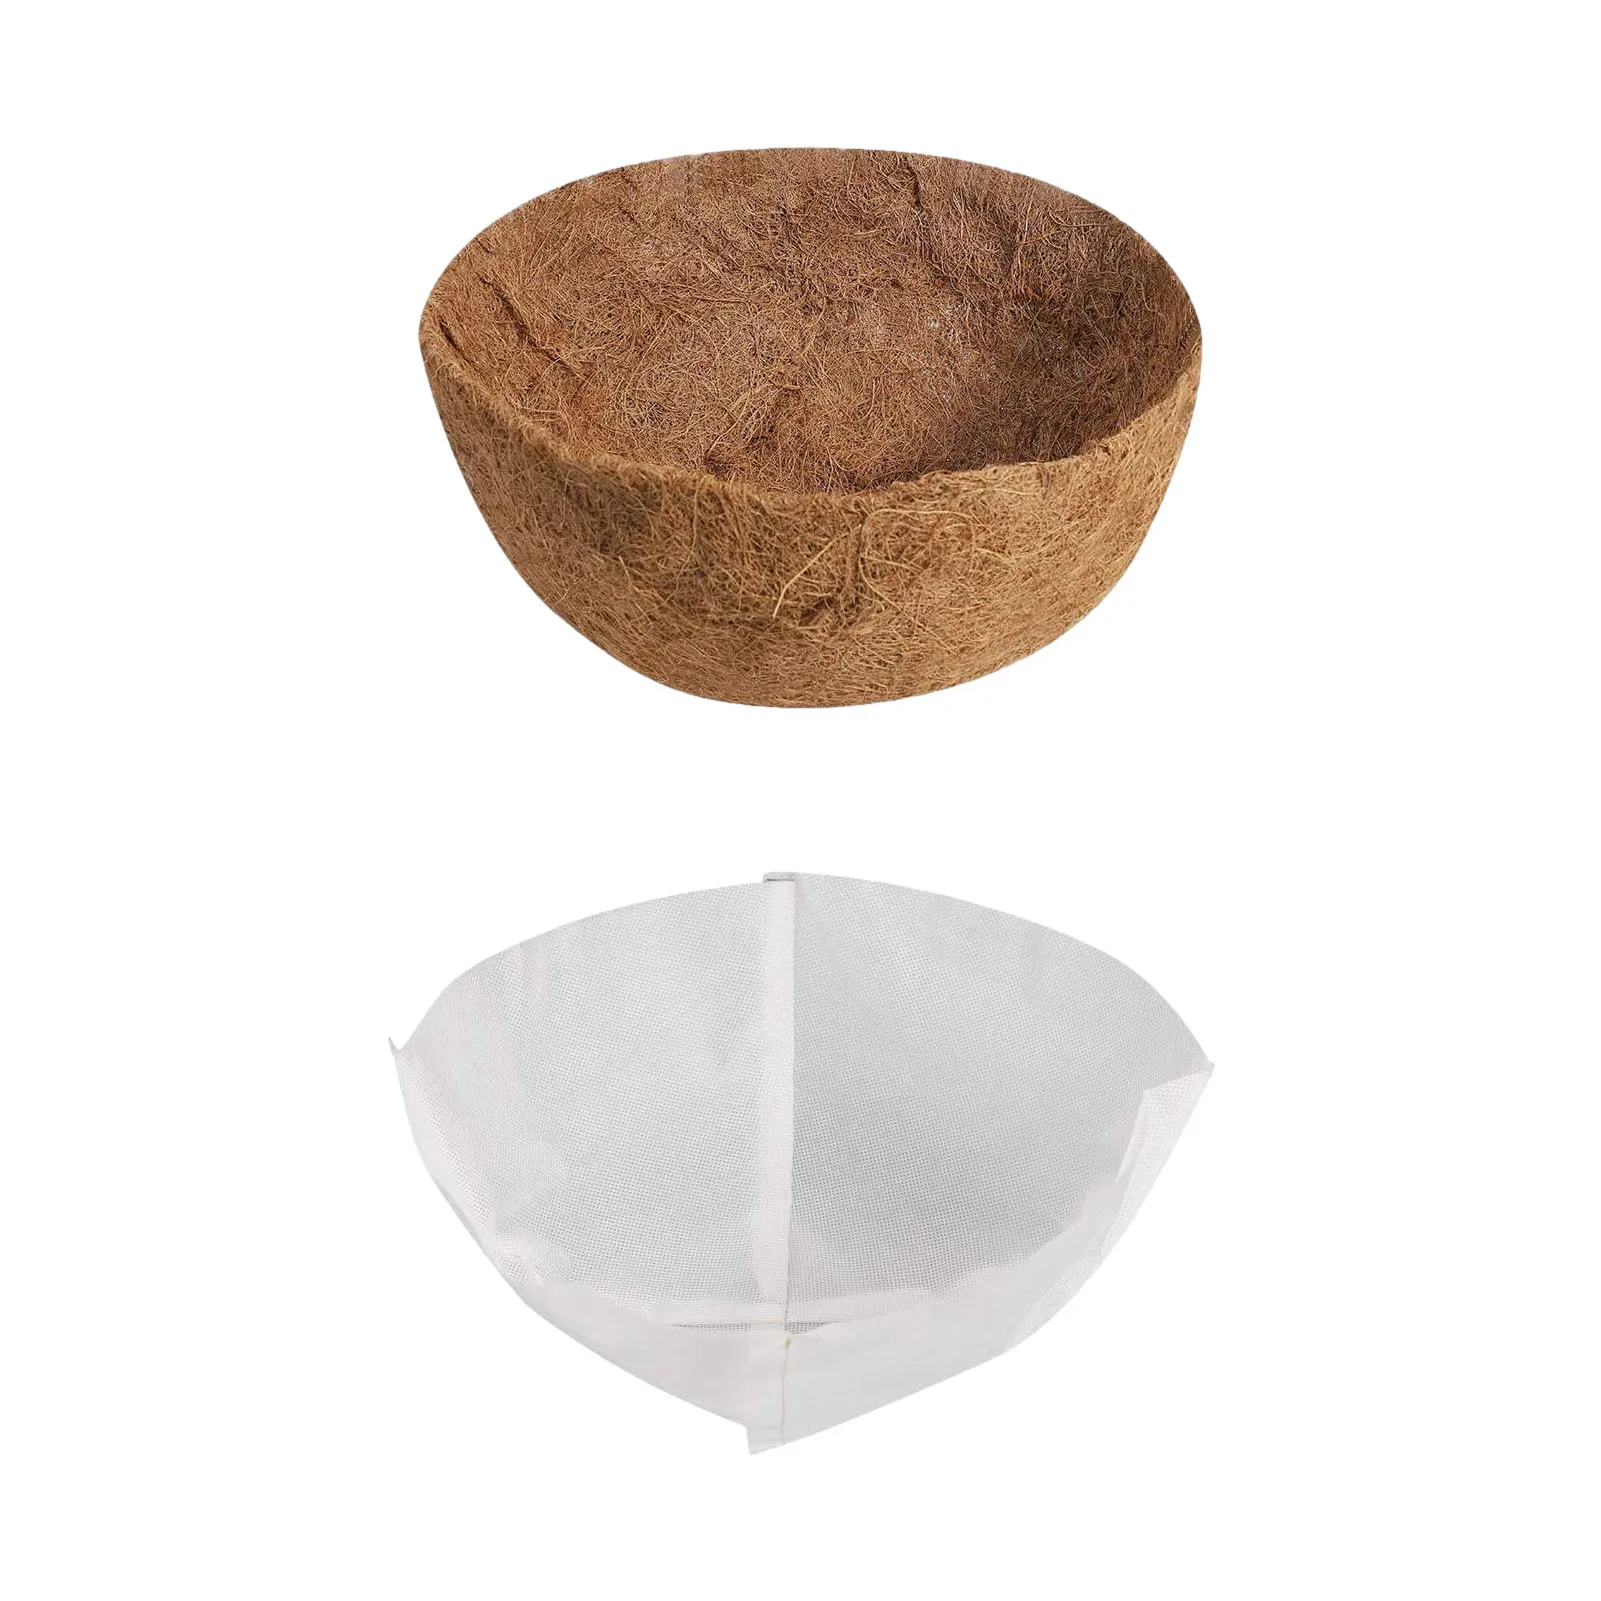 

Replaceable Thick Coco Coir Liners Multiple Sizes Strong Water Absorption Coconut Fiber Lining For Hanging Planter Regular